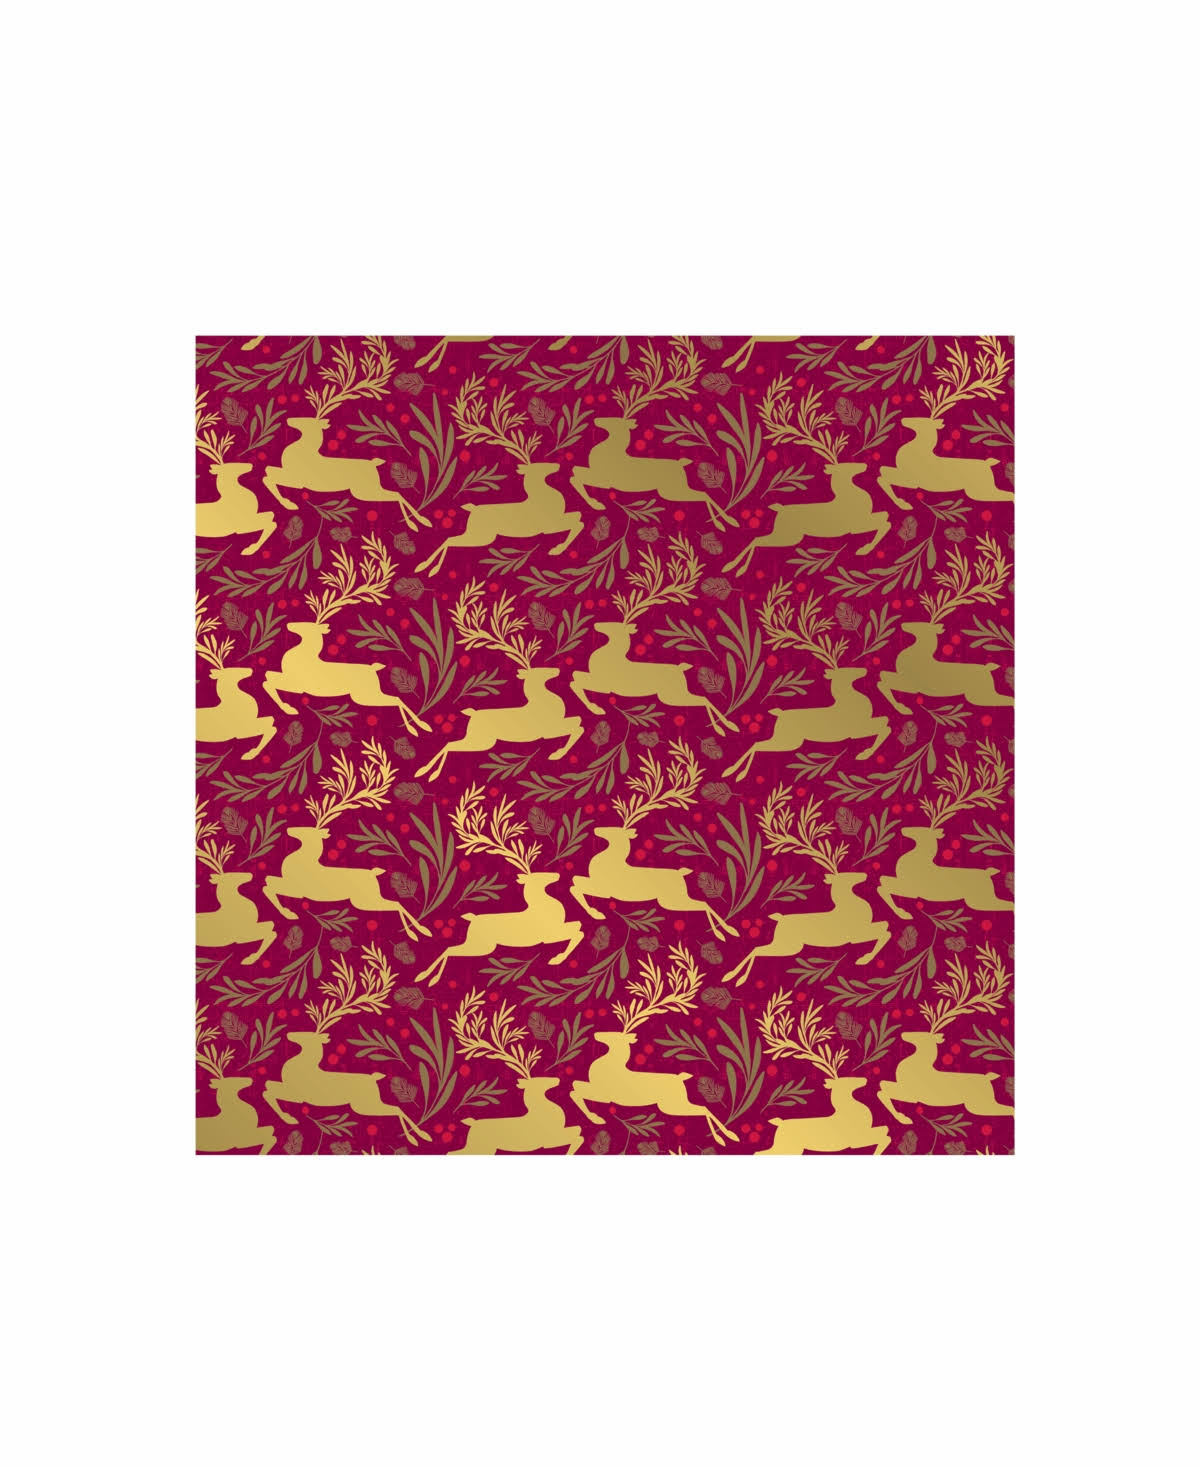 The Gift Wrap Company Wineberry Stags 9' Gift Wrap